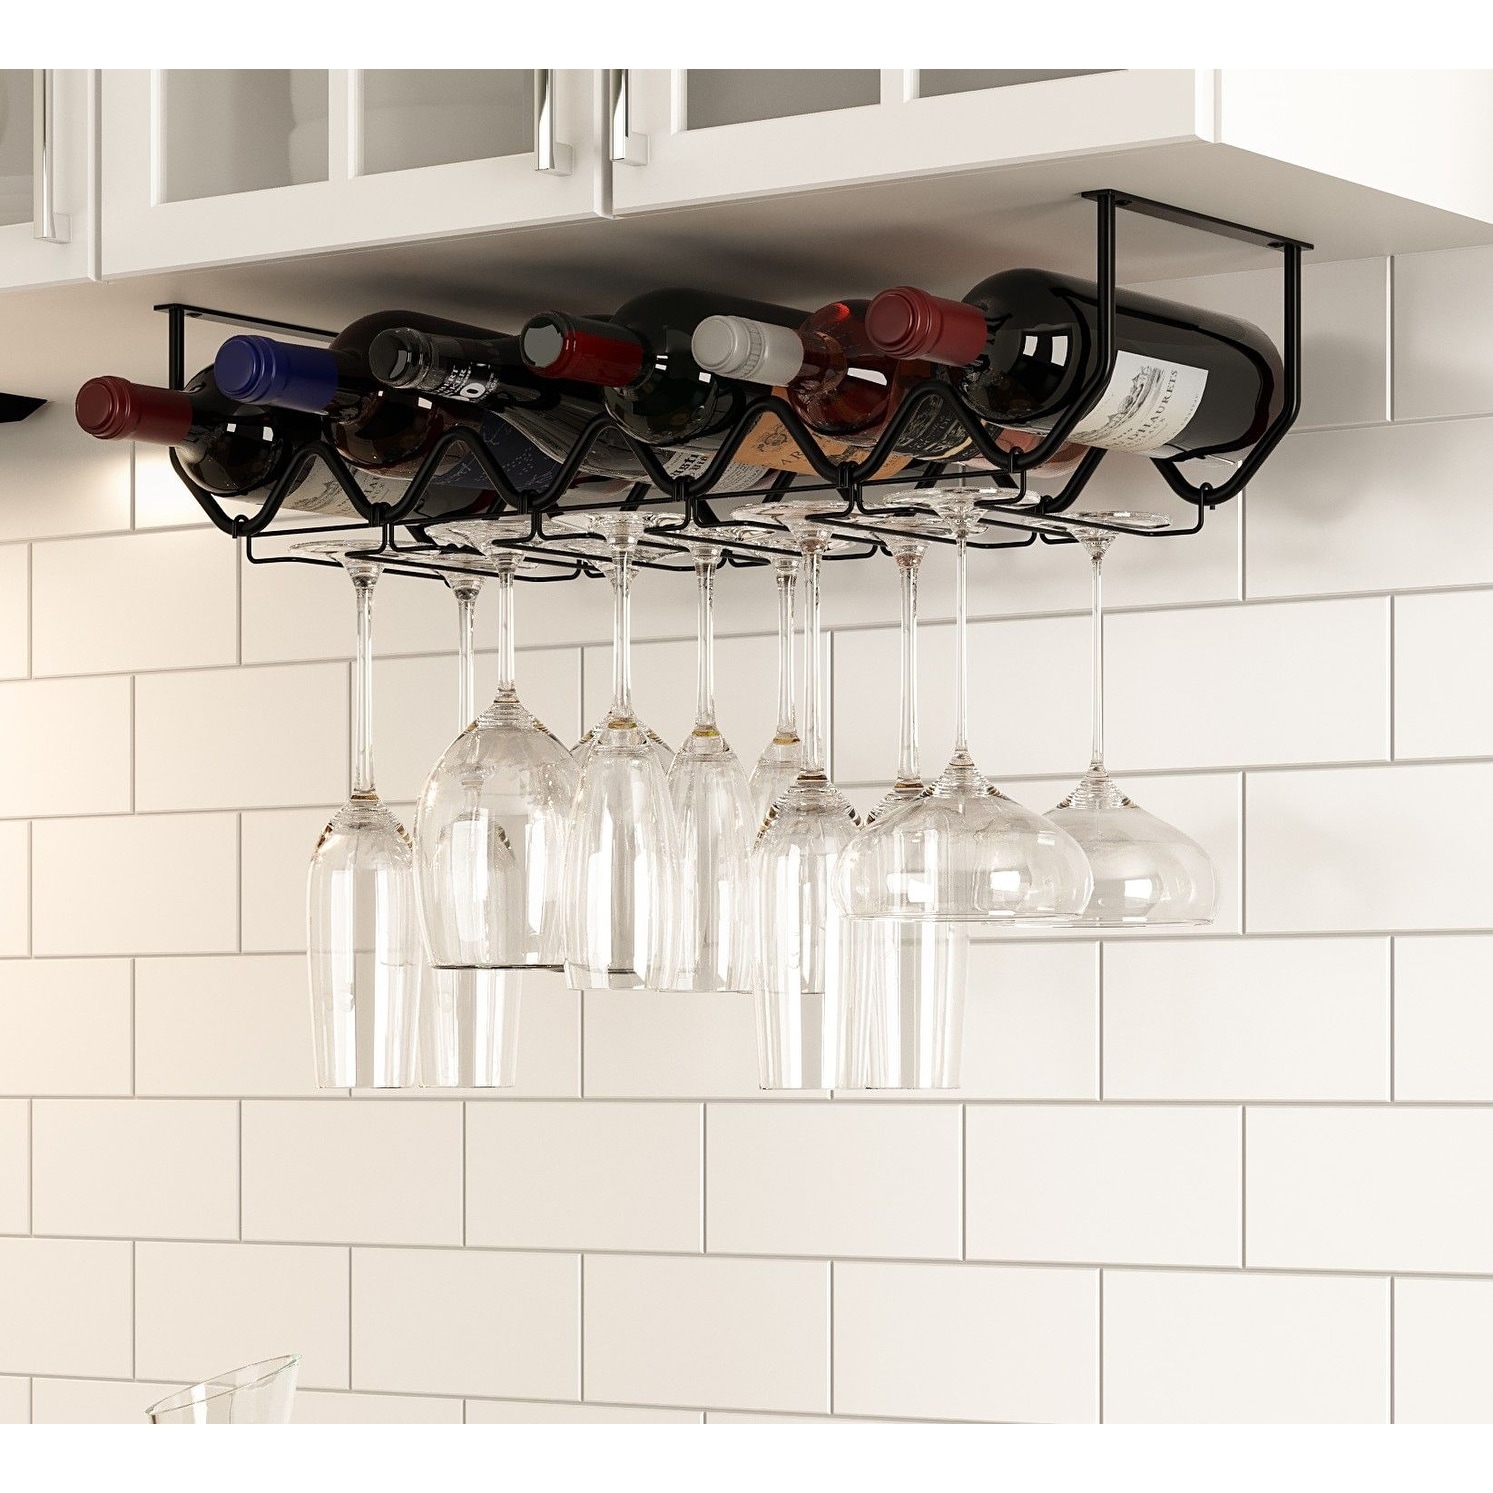 https://ak1.ostkcdn.com/images/products/is/images/direct/258cbf928be4ff50b24553ccf0aa462ecbee938f/Metal-Wine-Glass-Holder-%26-Wine-Bottle-Rack-for-Kitchen-and-Bar-Decor%2C-Black.jpg